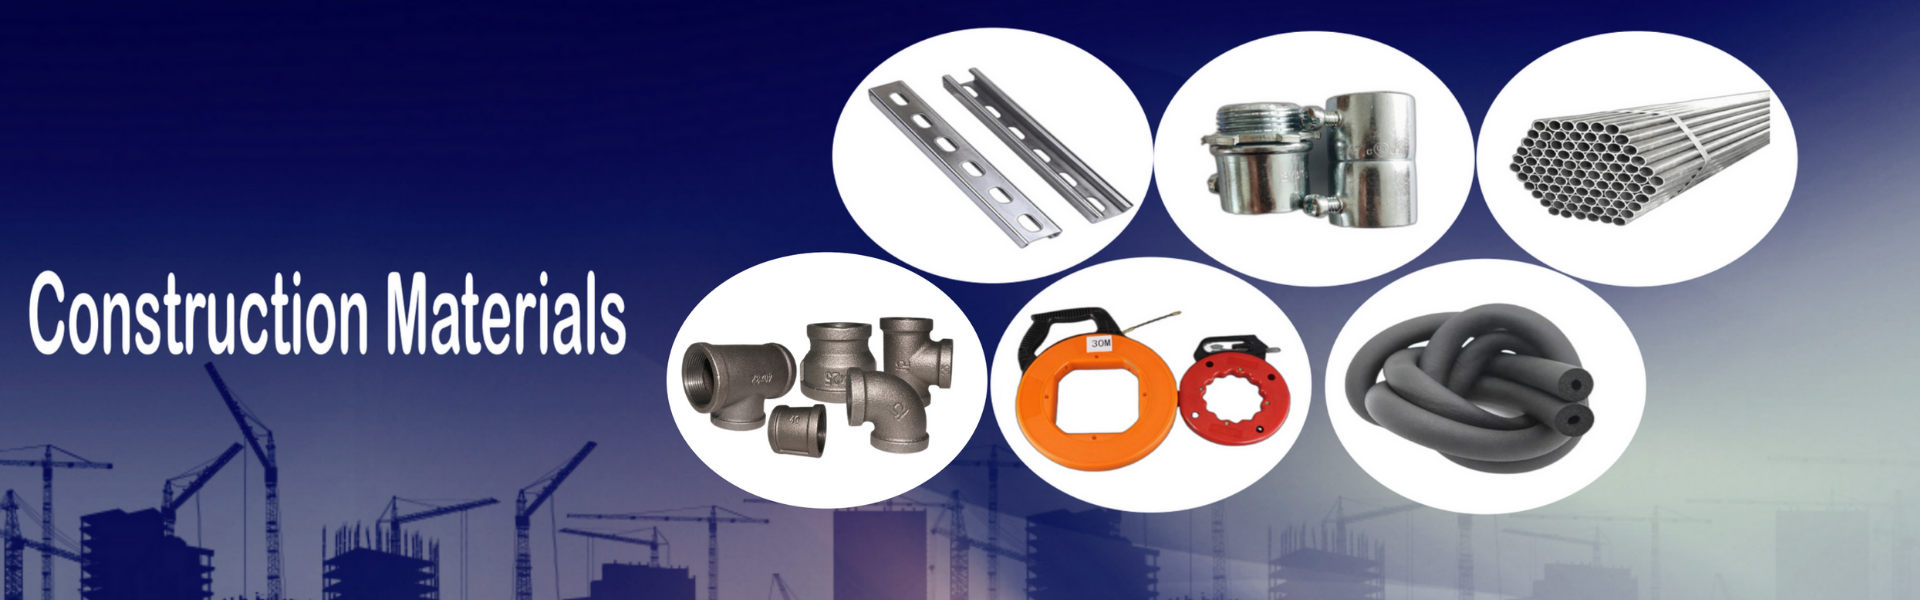 Huzhou xrtop specializes in all kinds of hot-dip galvanized round pipes, square pipes, galvanized strip round pipes, square pipes, fish tape wire cable pullers, rubber insulation pipes, etc